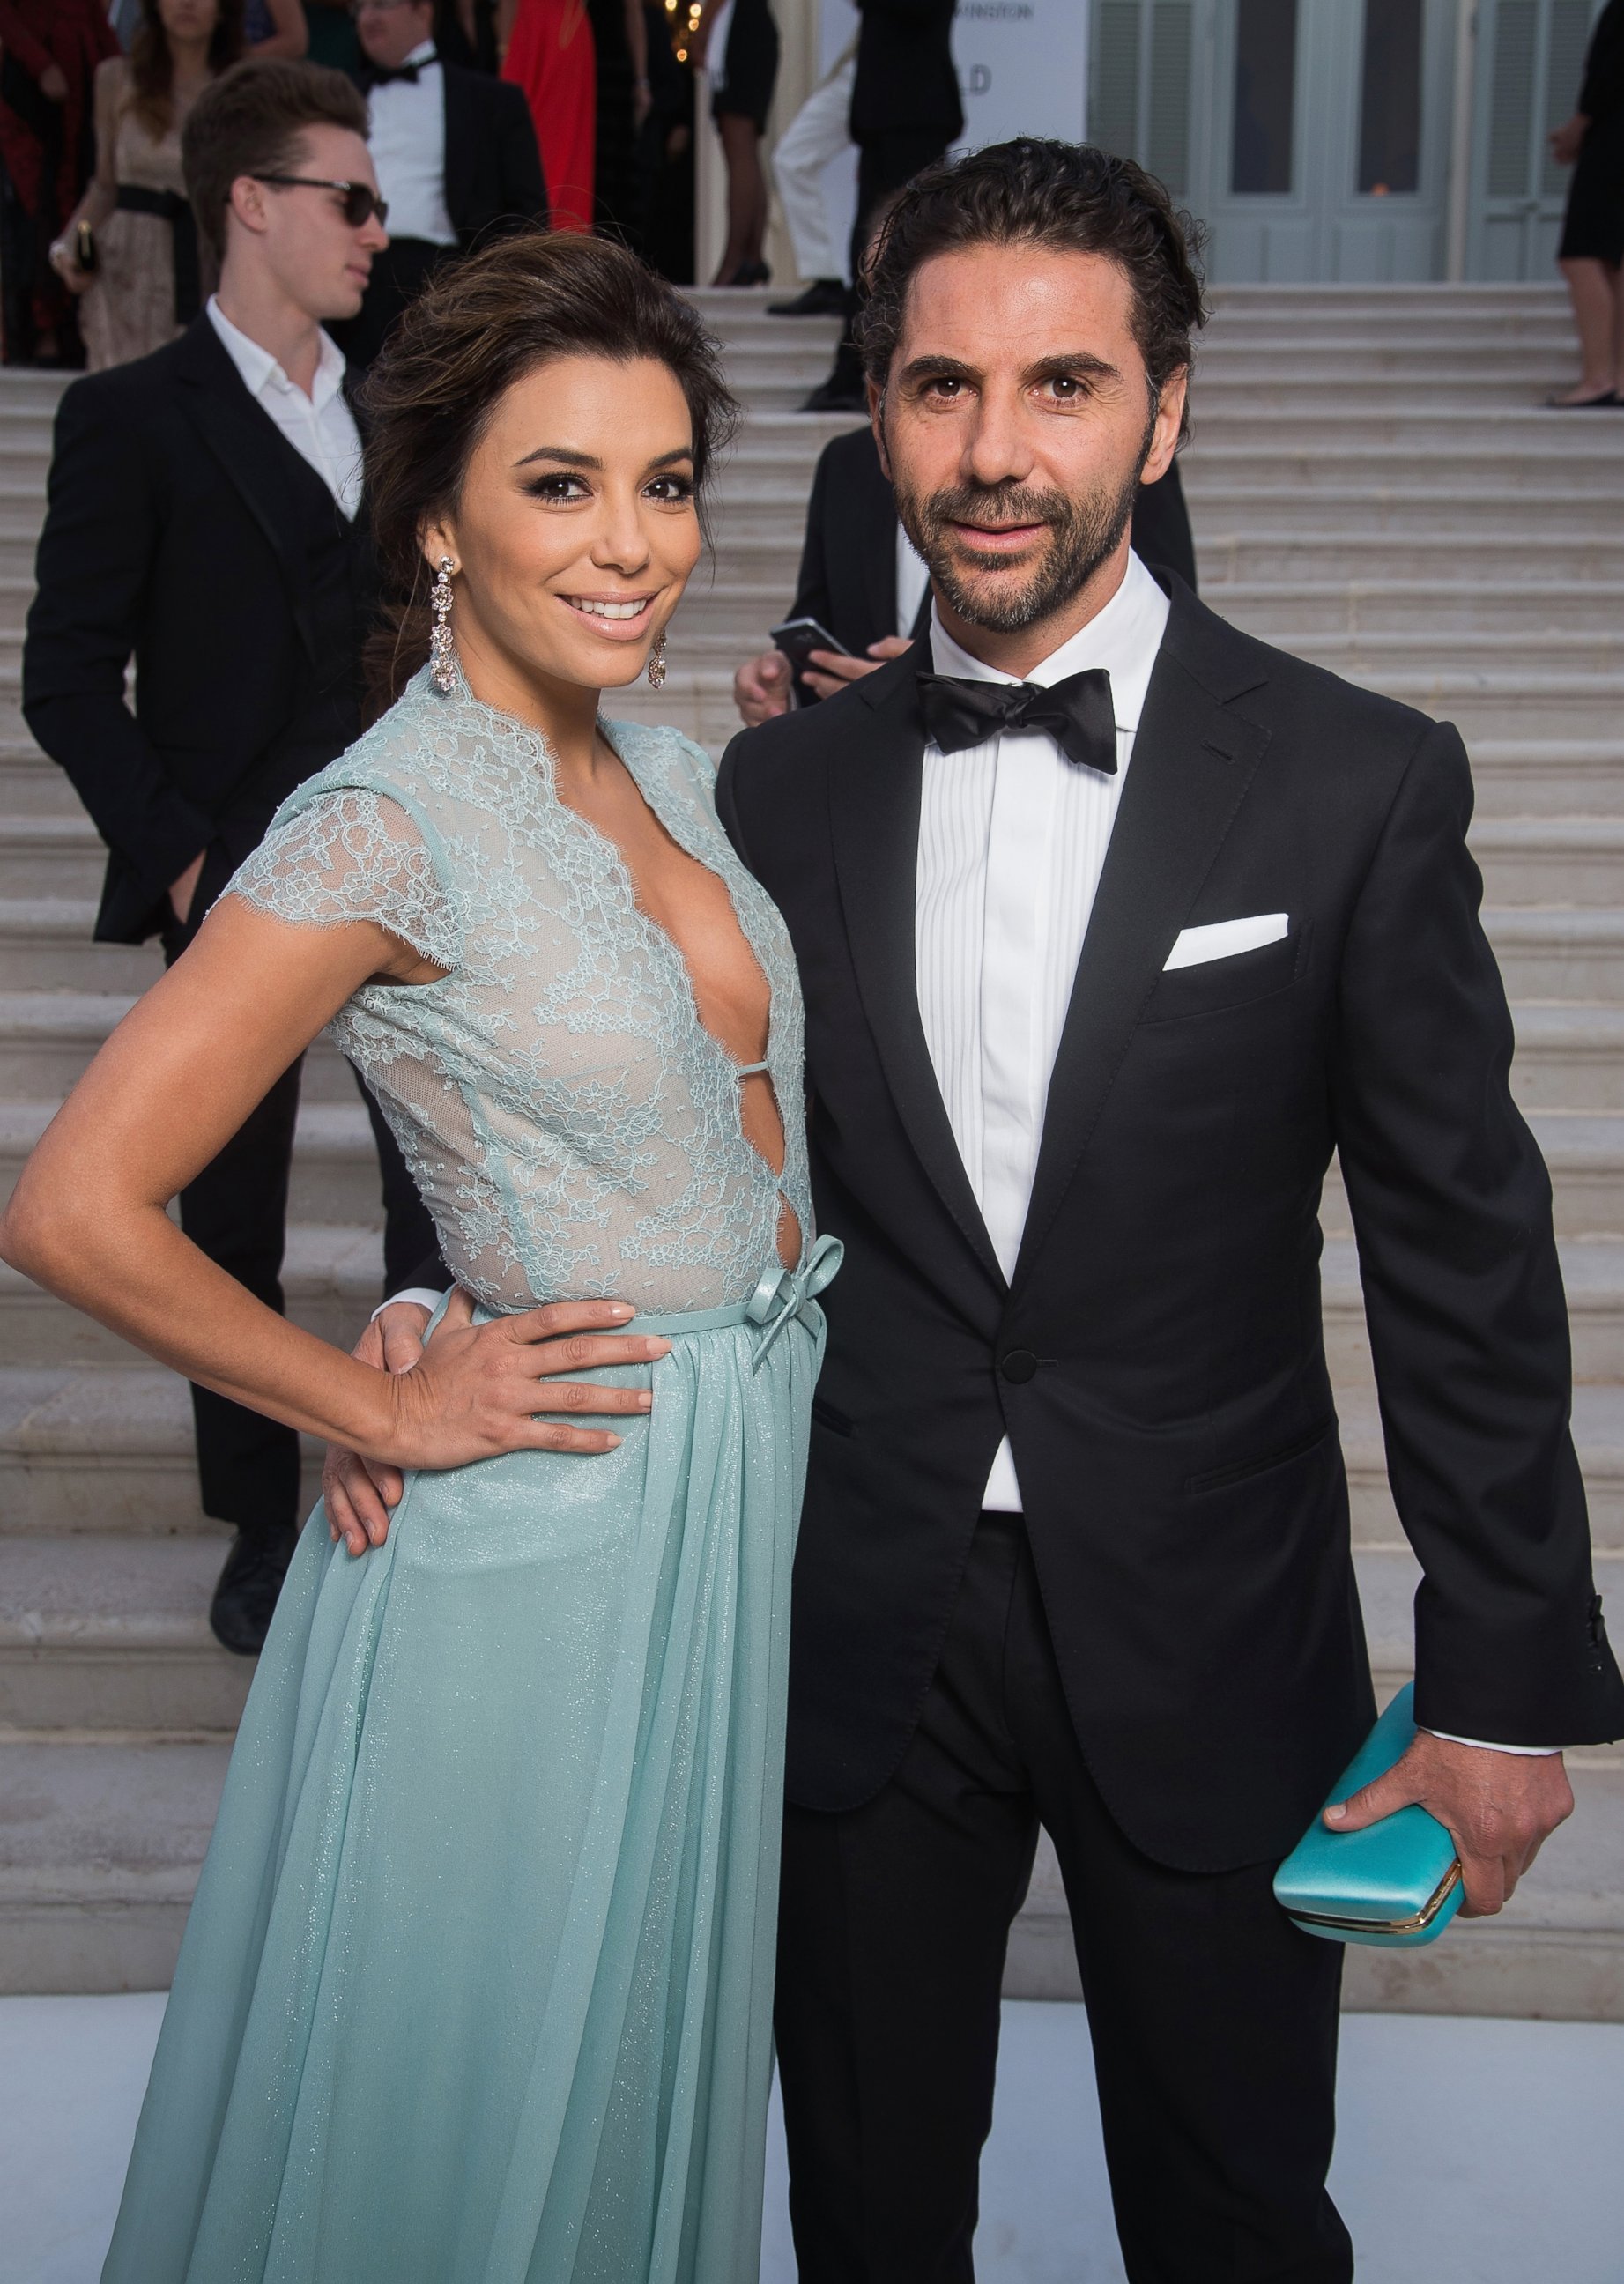 PHOTO: Eva Longoria and Jose Antonio Baston attend amfAR's 22nd Cinema Against AIDS Gala, Presented By Bold Films And Harry Winston at Hotel du Cap-Eden-Roc, May 21, 2015 in Cap d'Antibes, France.